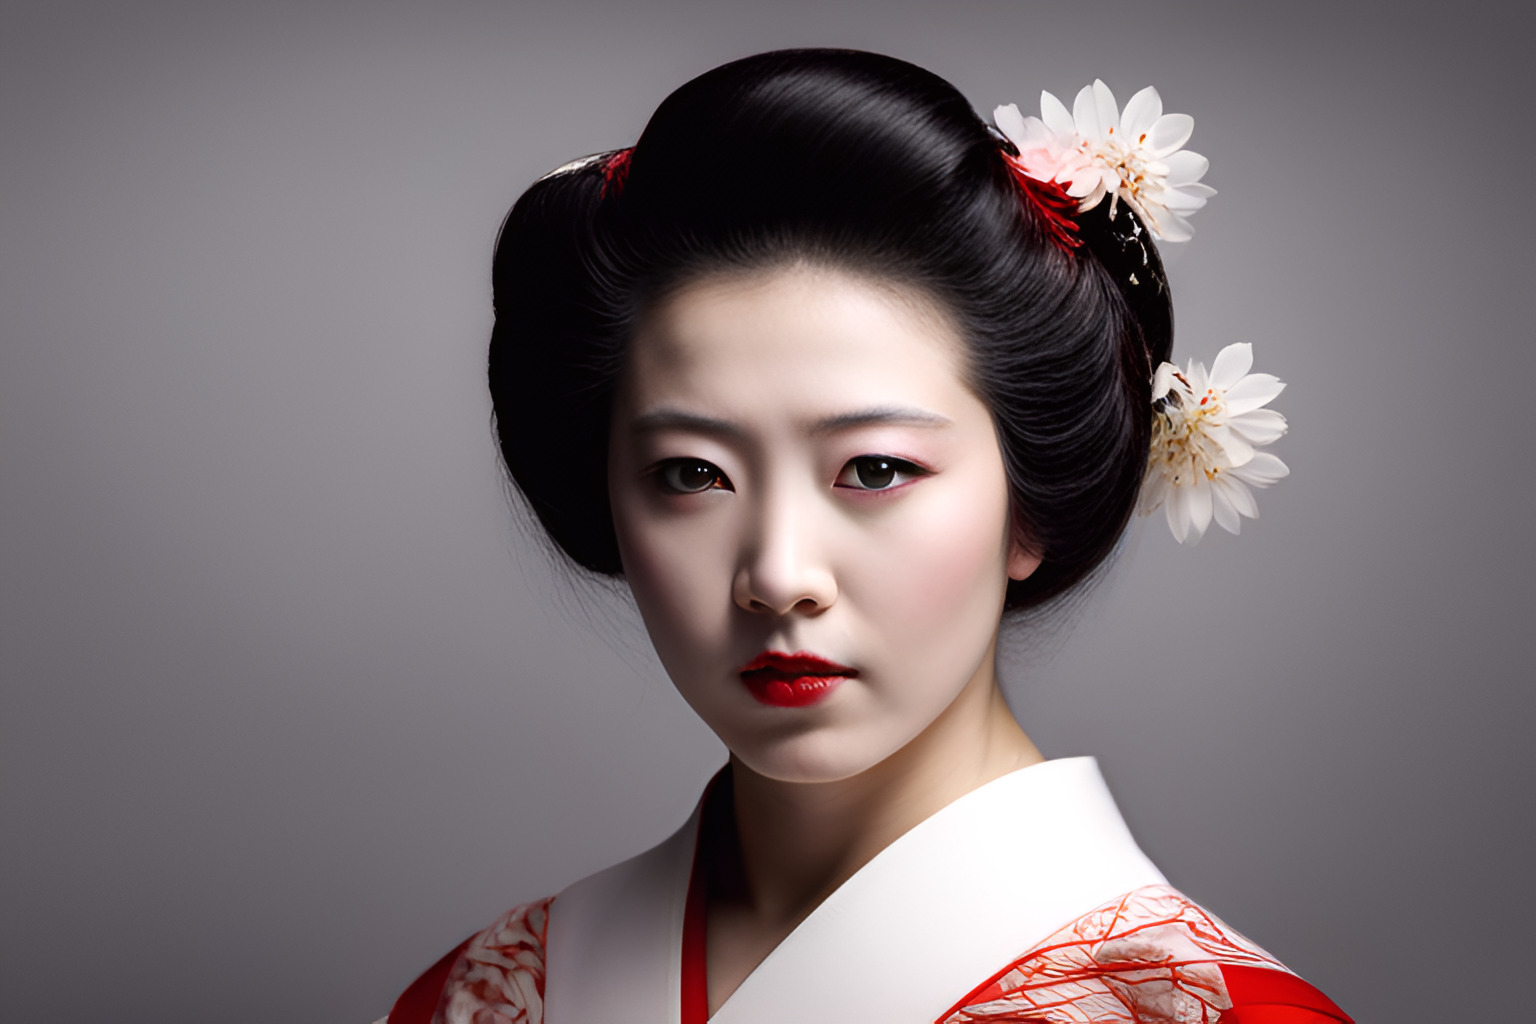 Japanese Geisha in remaster photograph from 1982